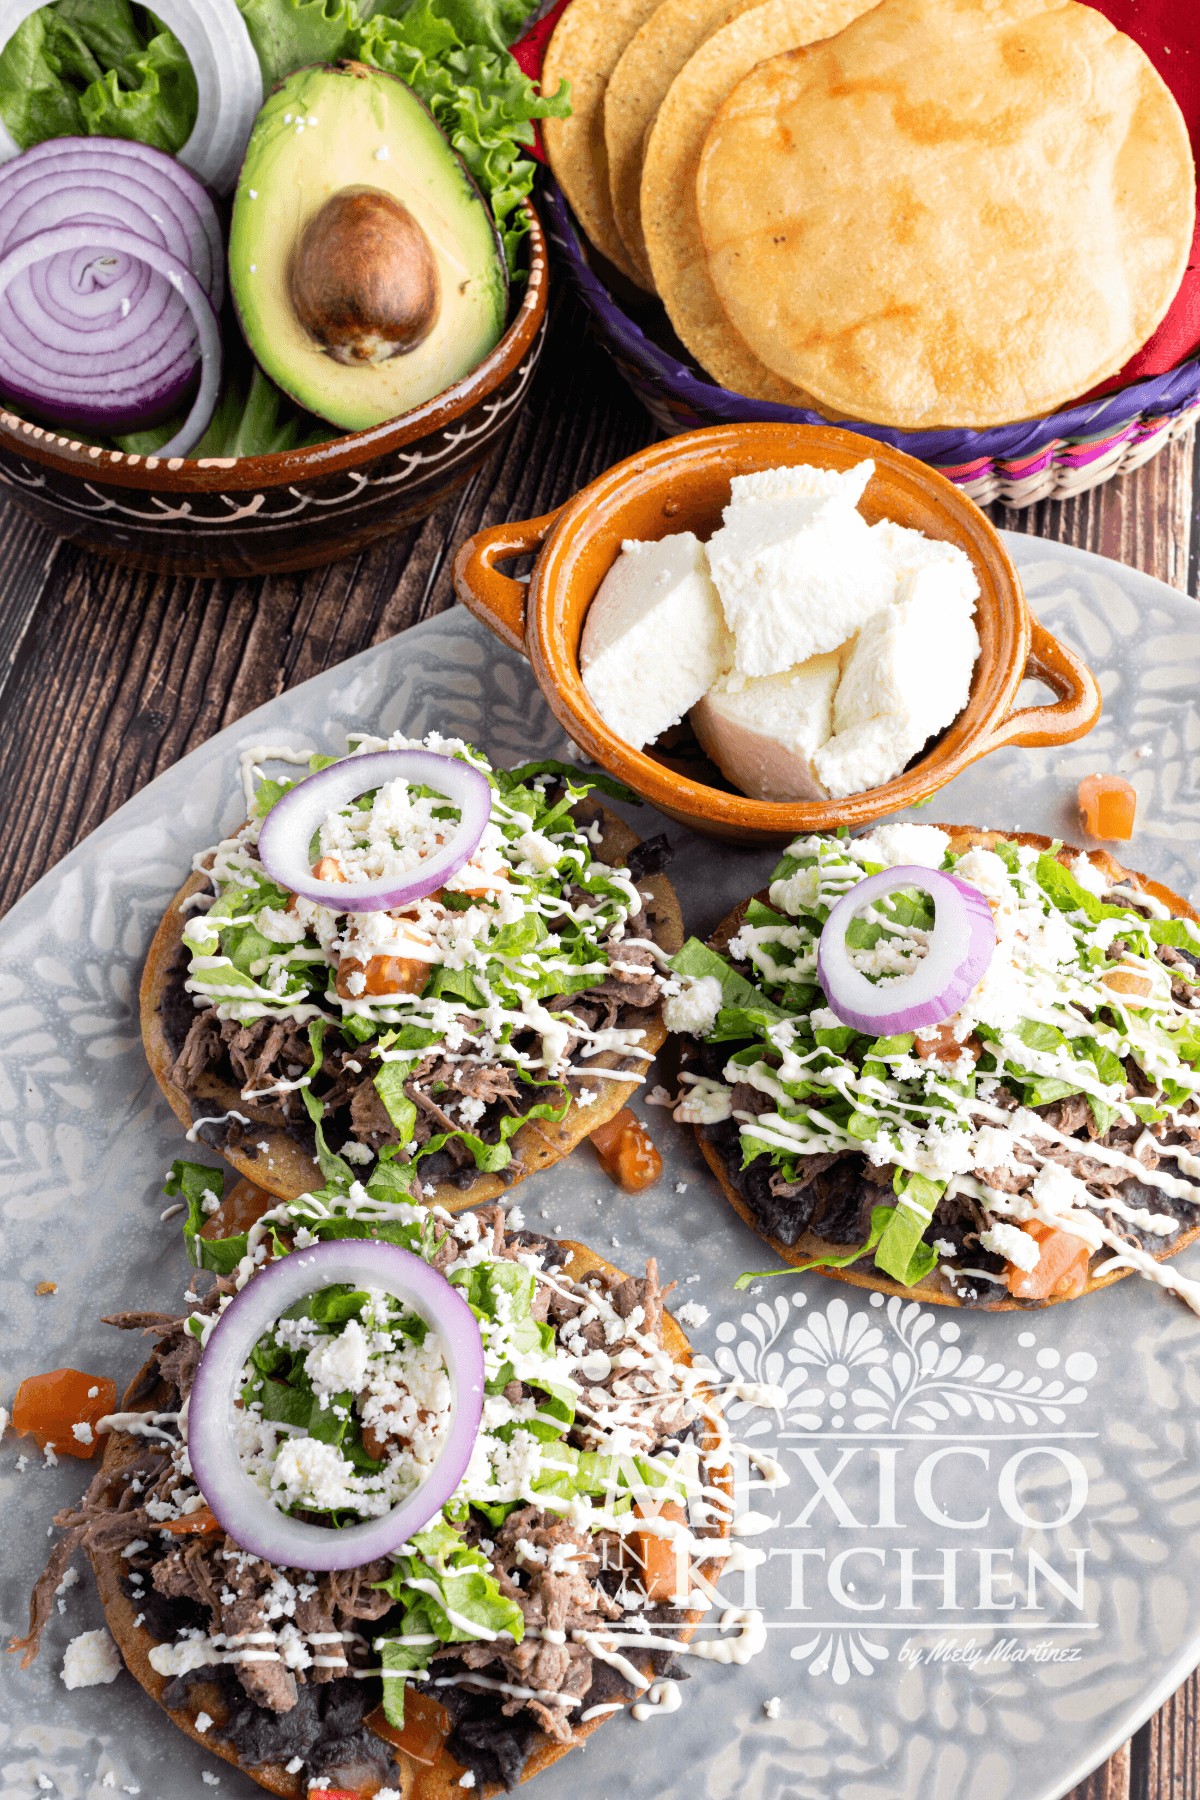 Beef tostada with toppings like beans, lettuce, Mexican crema , and queso fresco.